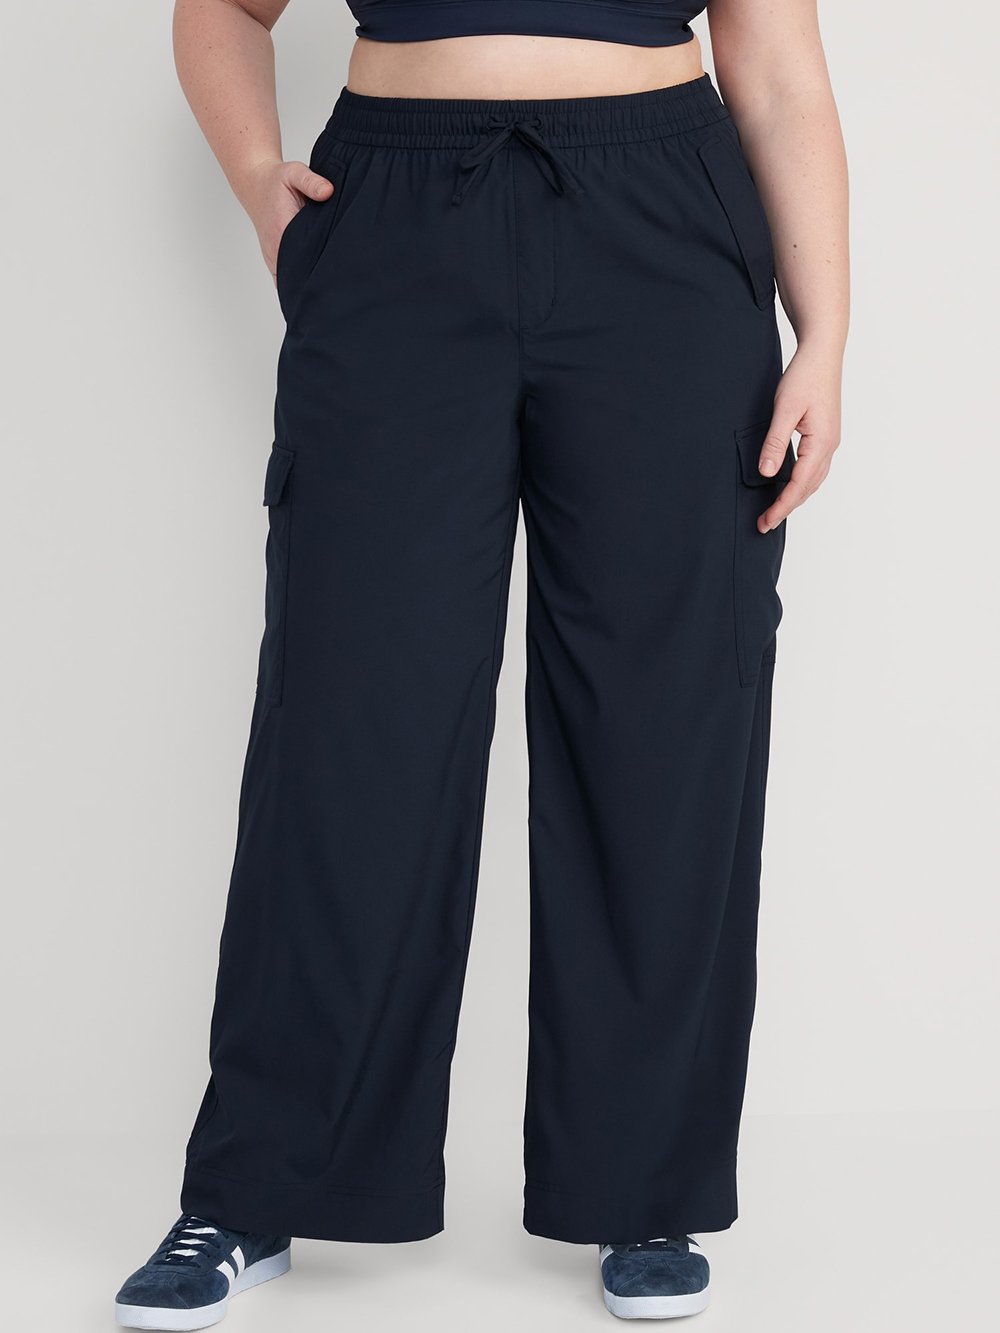 The Best Cargo Pants To Shop For Spring 2023 | Chatelaine